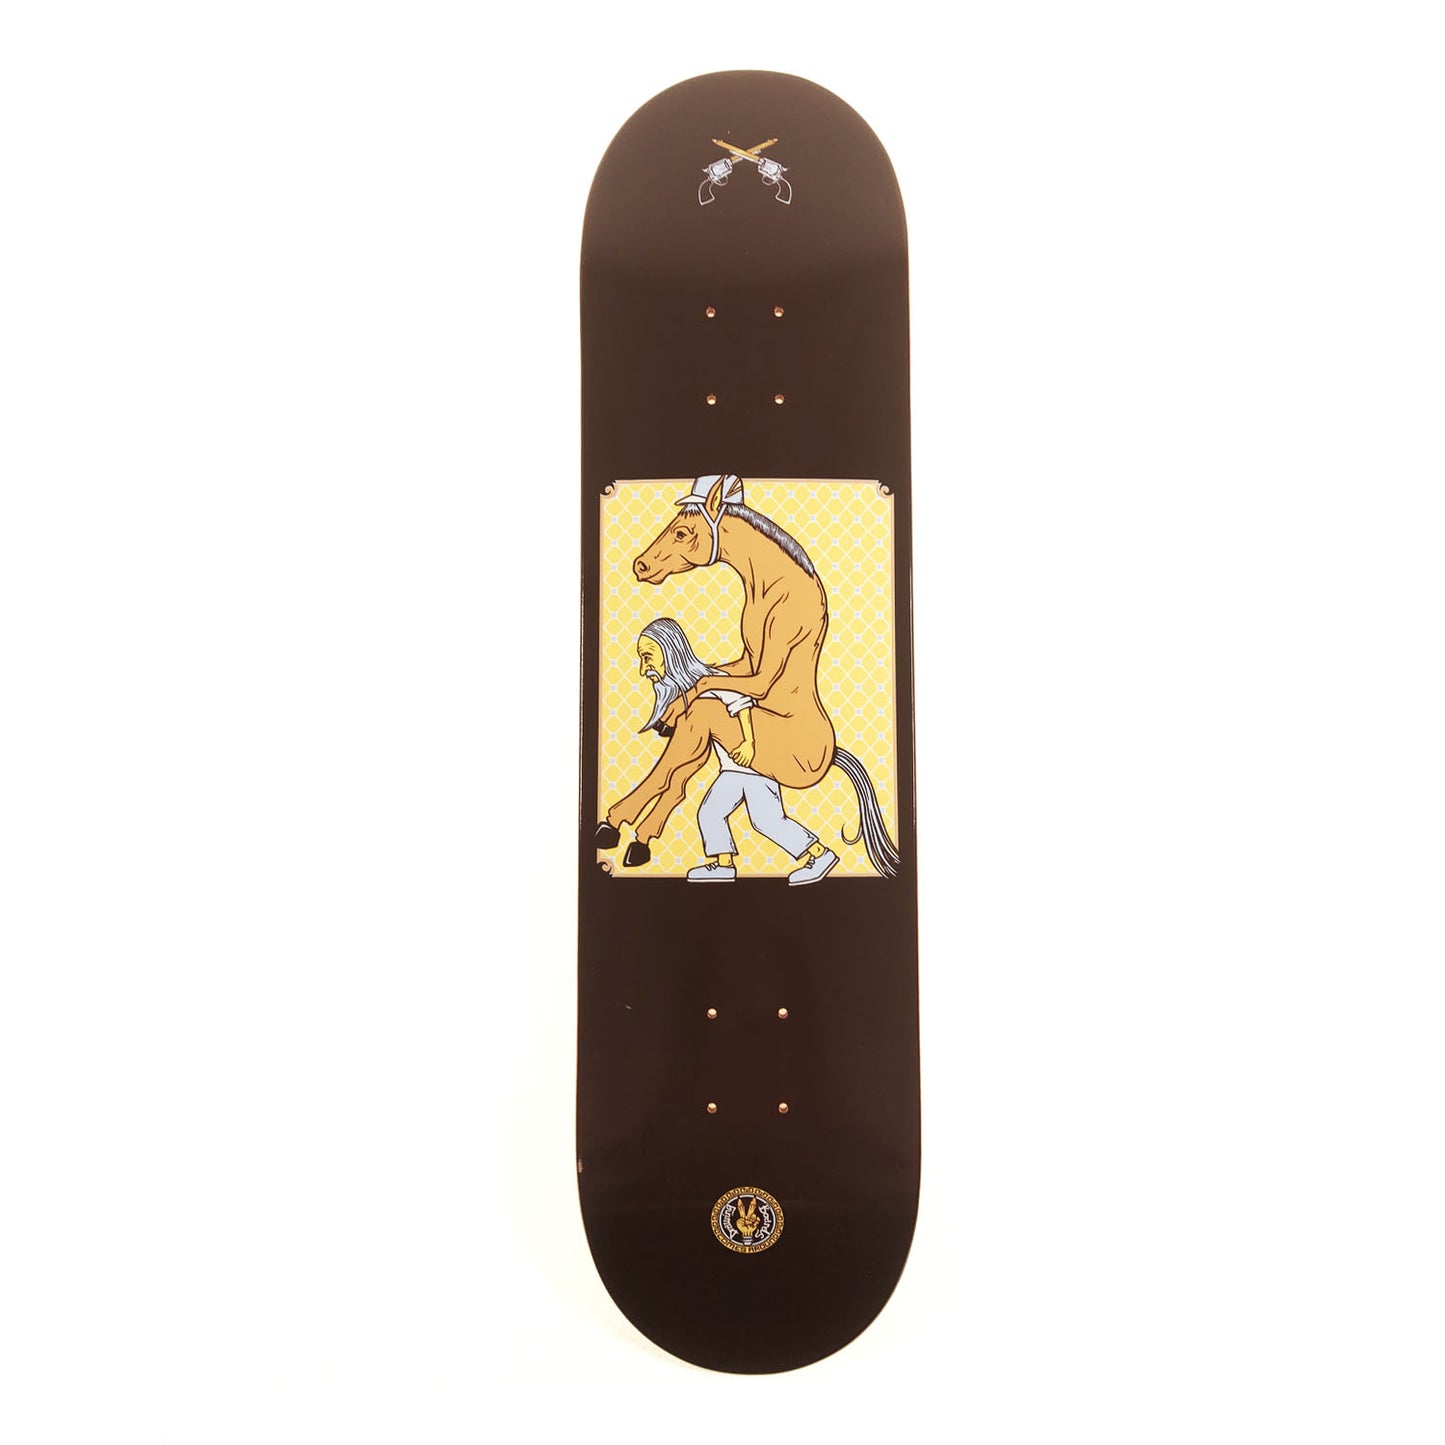 The Drawing Boards - 7.75" - Horse Power Deck - Prime Delux Store